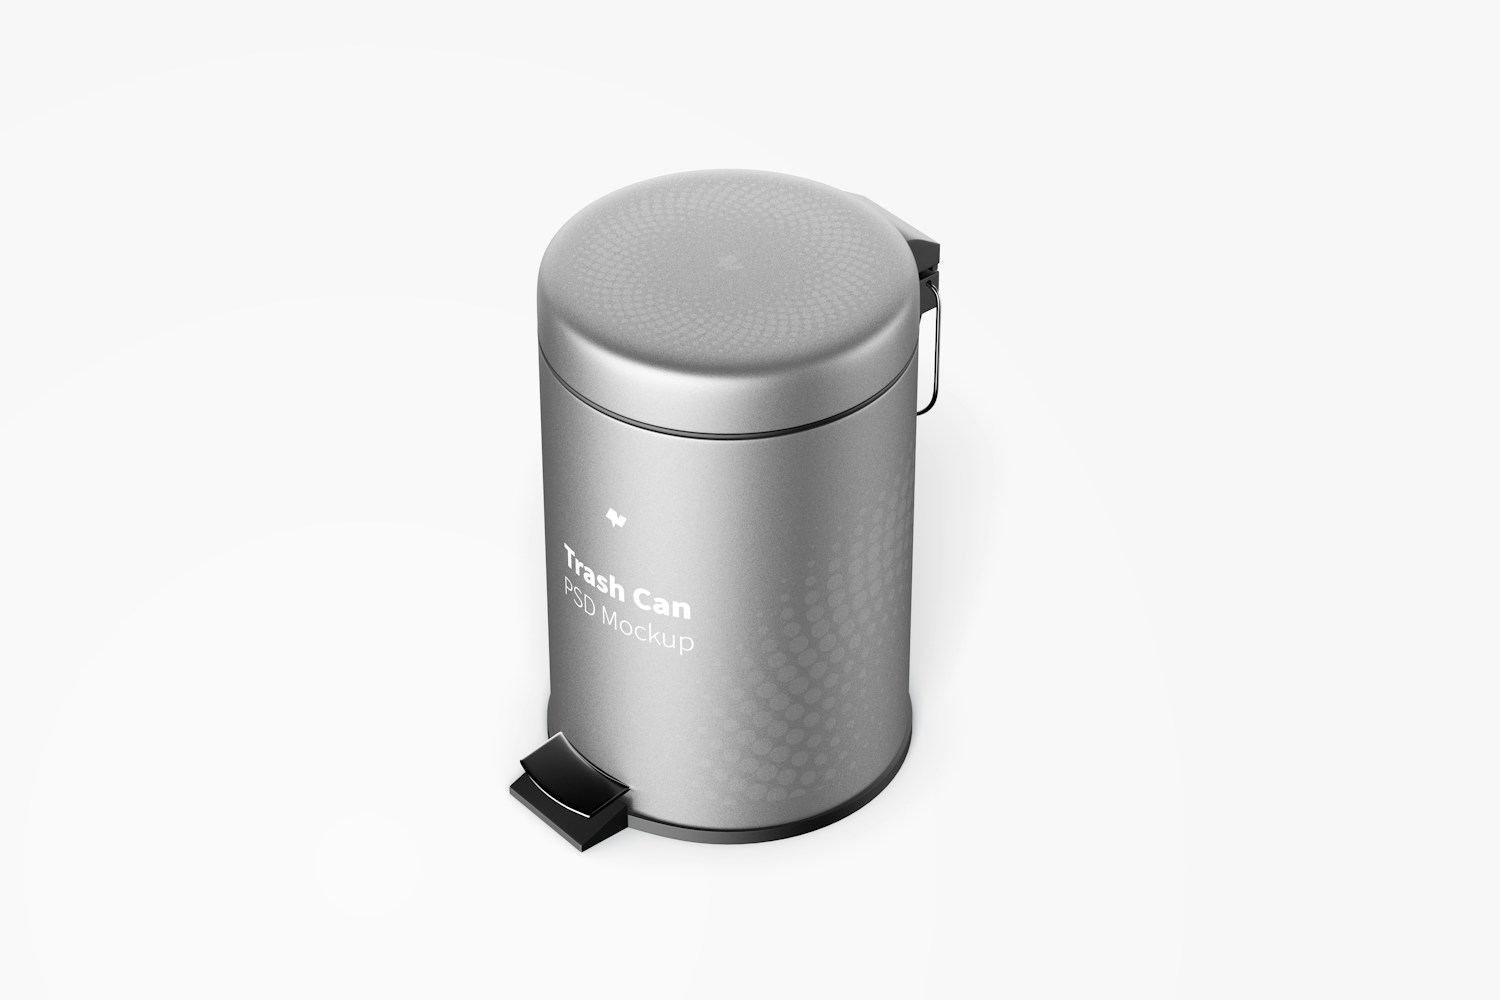 Trash Can With Foot Pedal Mockup, Left View